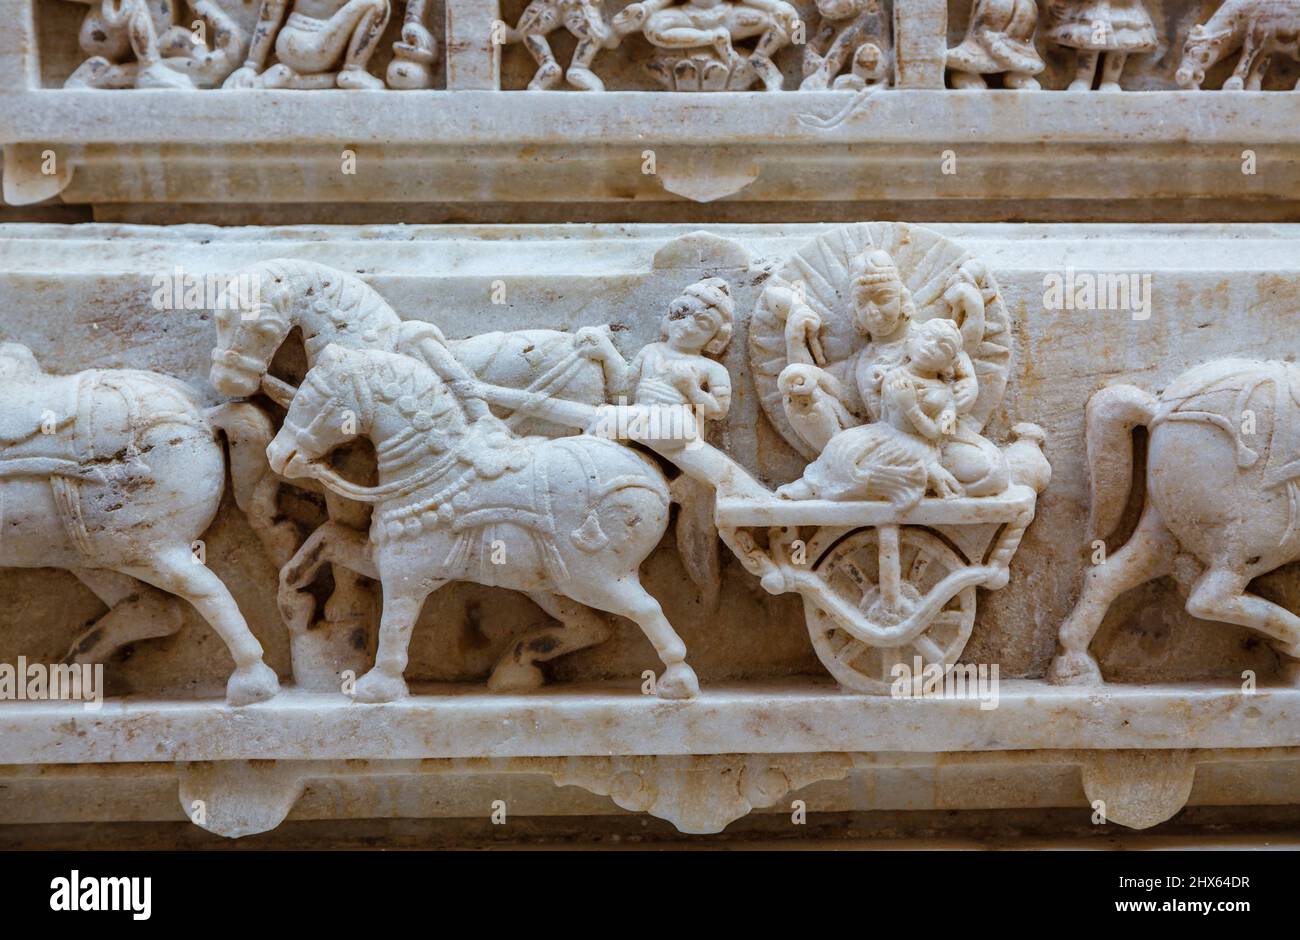 Horses and chariot sculptured frieze at the Hindu Shree Jagat Sheromani Ji Temple, Udaipur, Indian state of Rajasthan, India Stock Photo